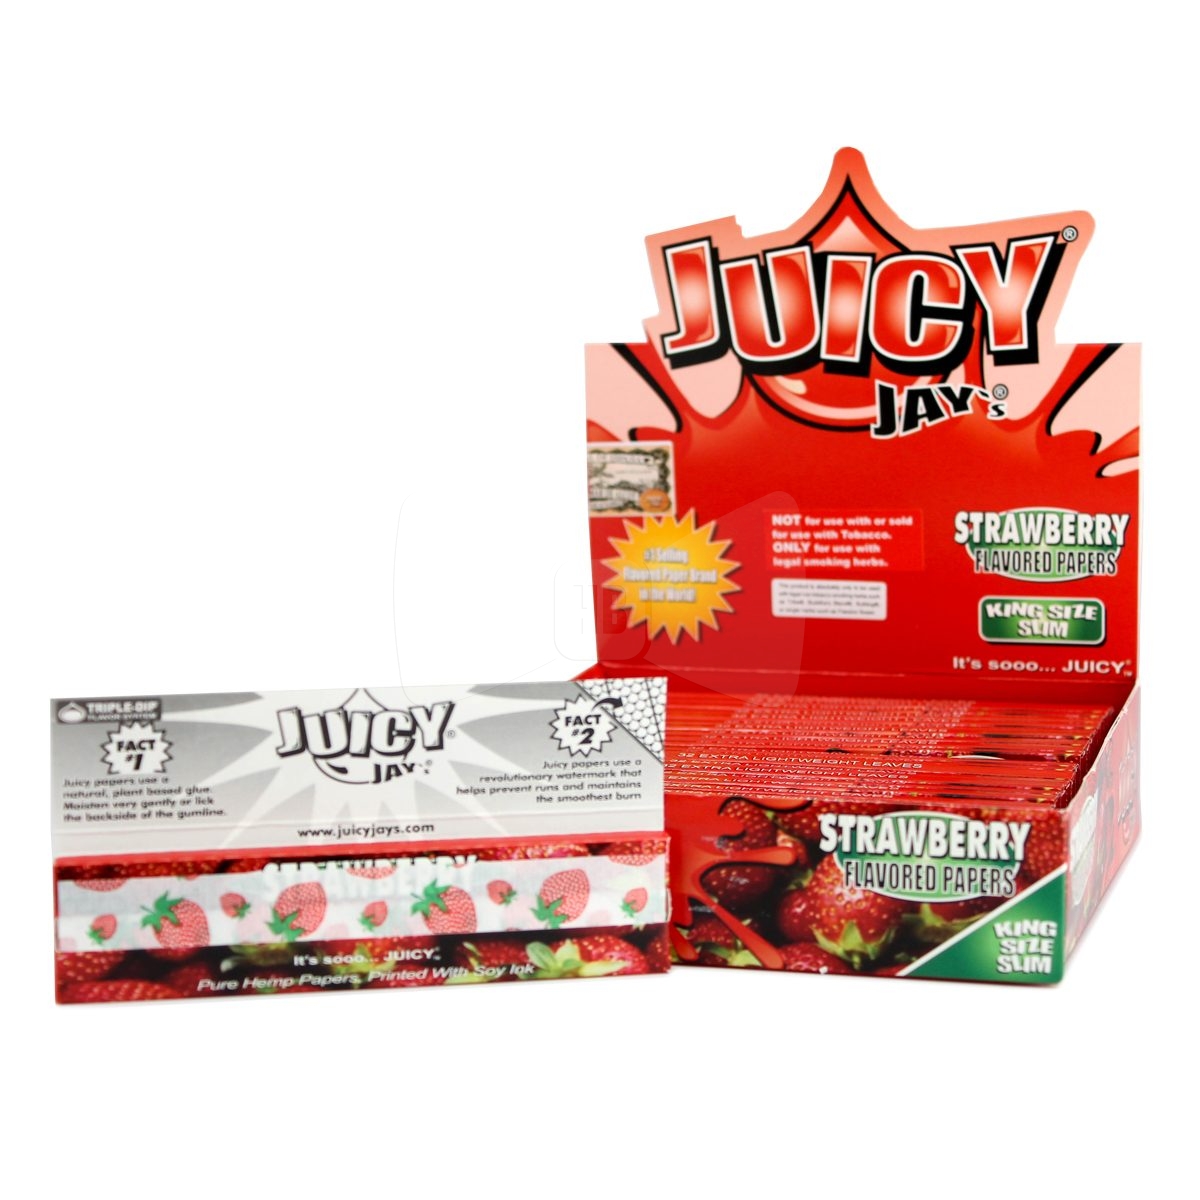 Juicy Jays Strawberry Rolling Papers Full Box (24 packs) King Size